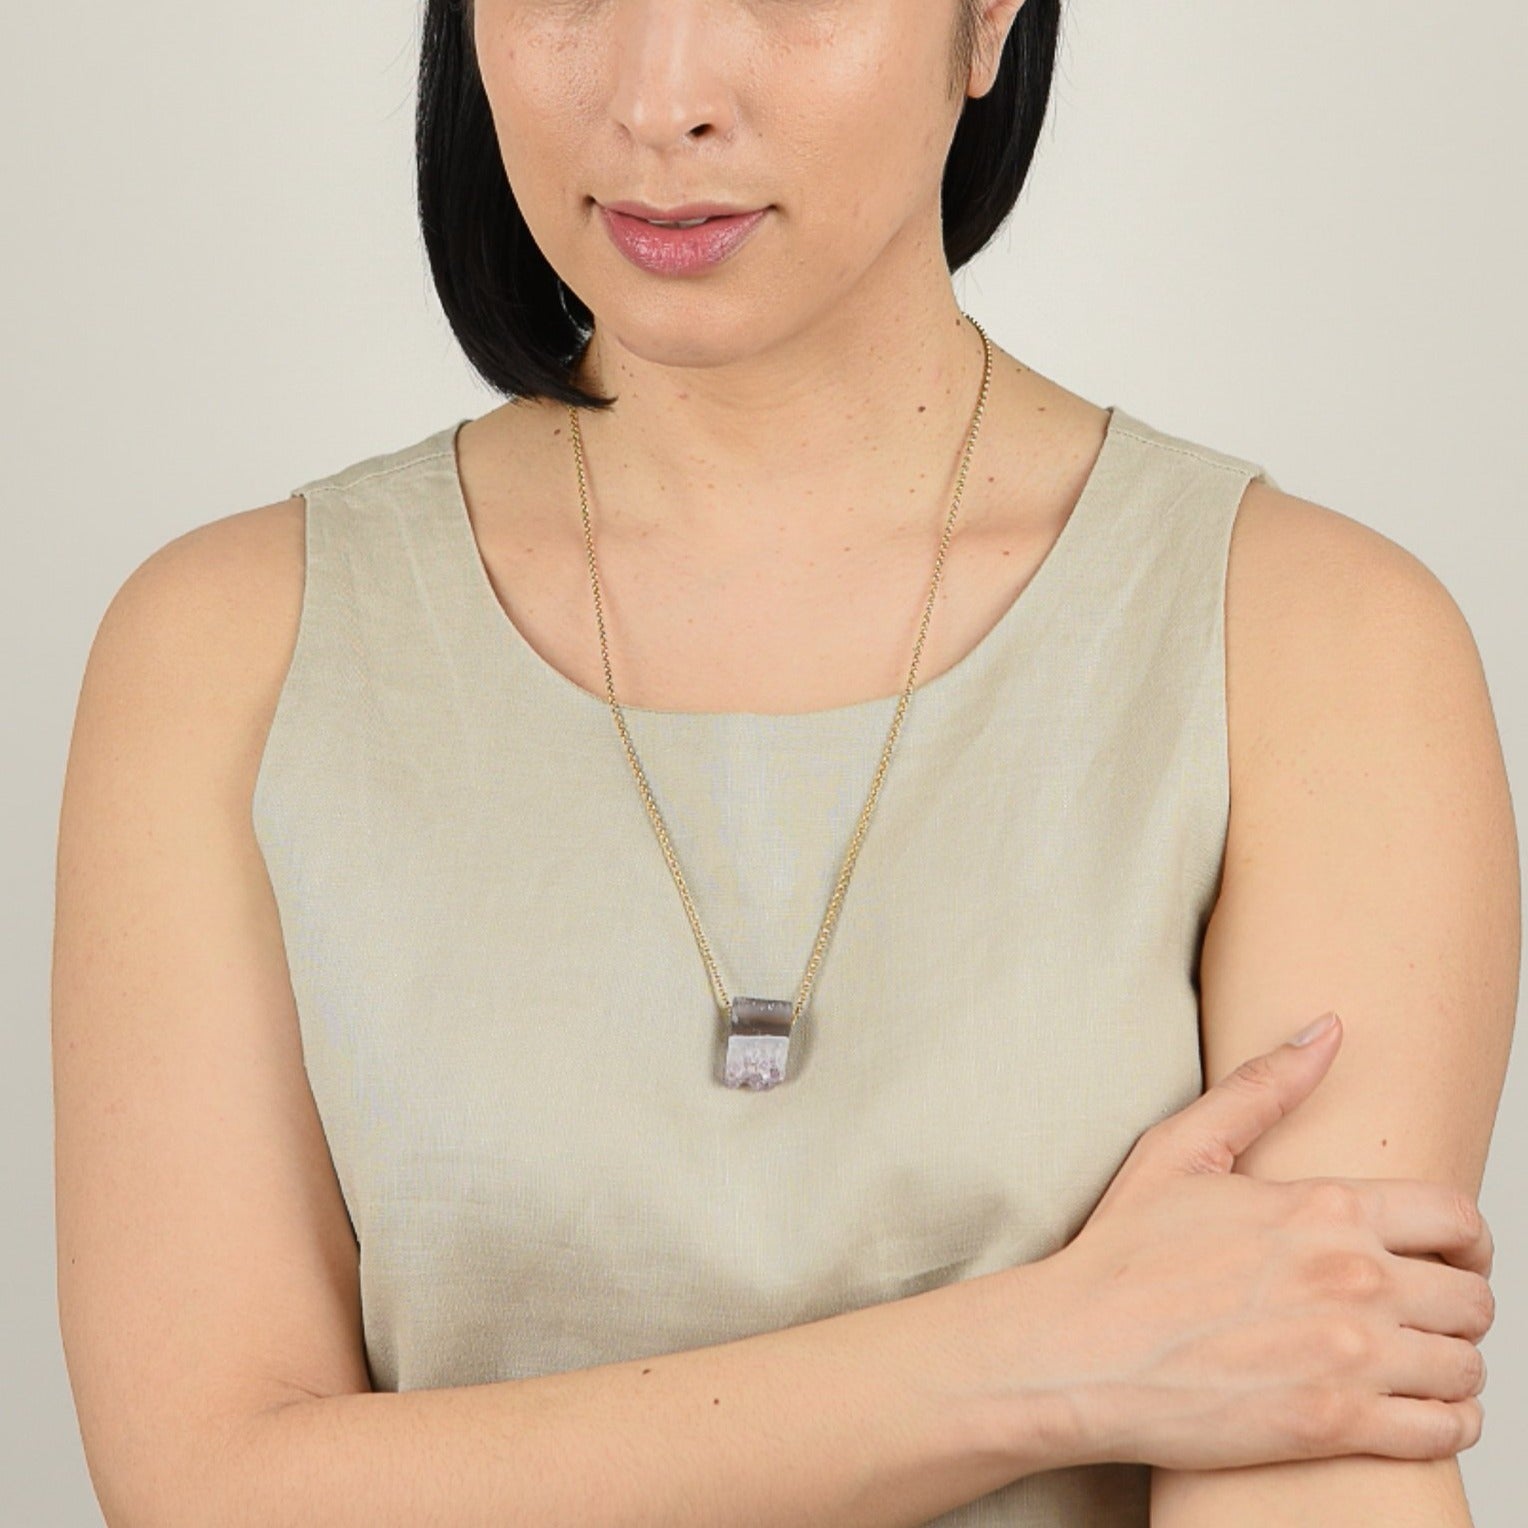 Model from waist up with mid tone skin and shoulder length black hair wearing necklace.  